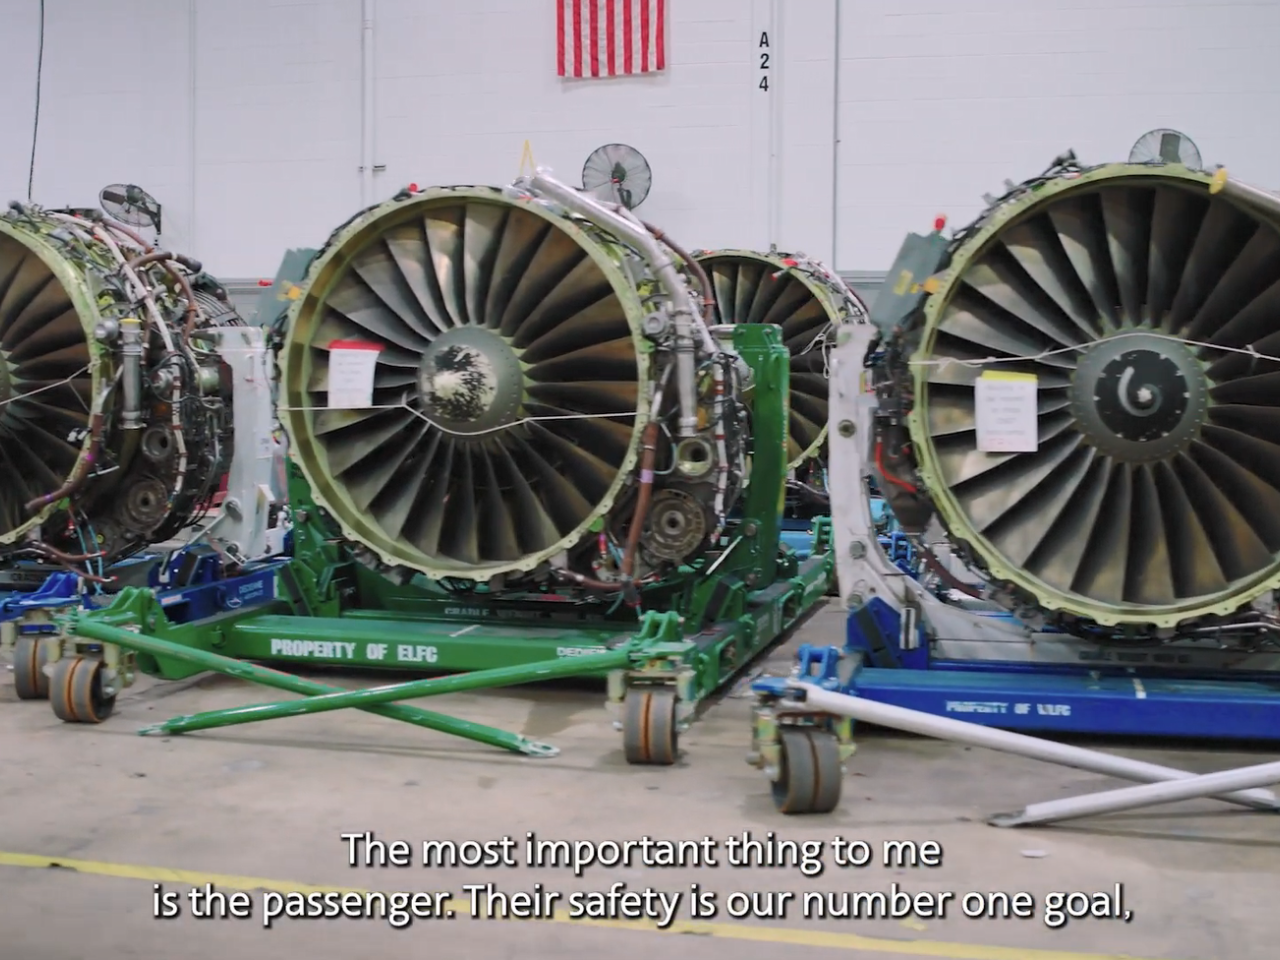 A row of airplane engines on trollies.